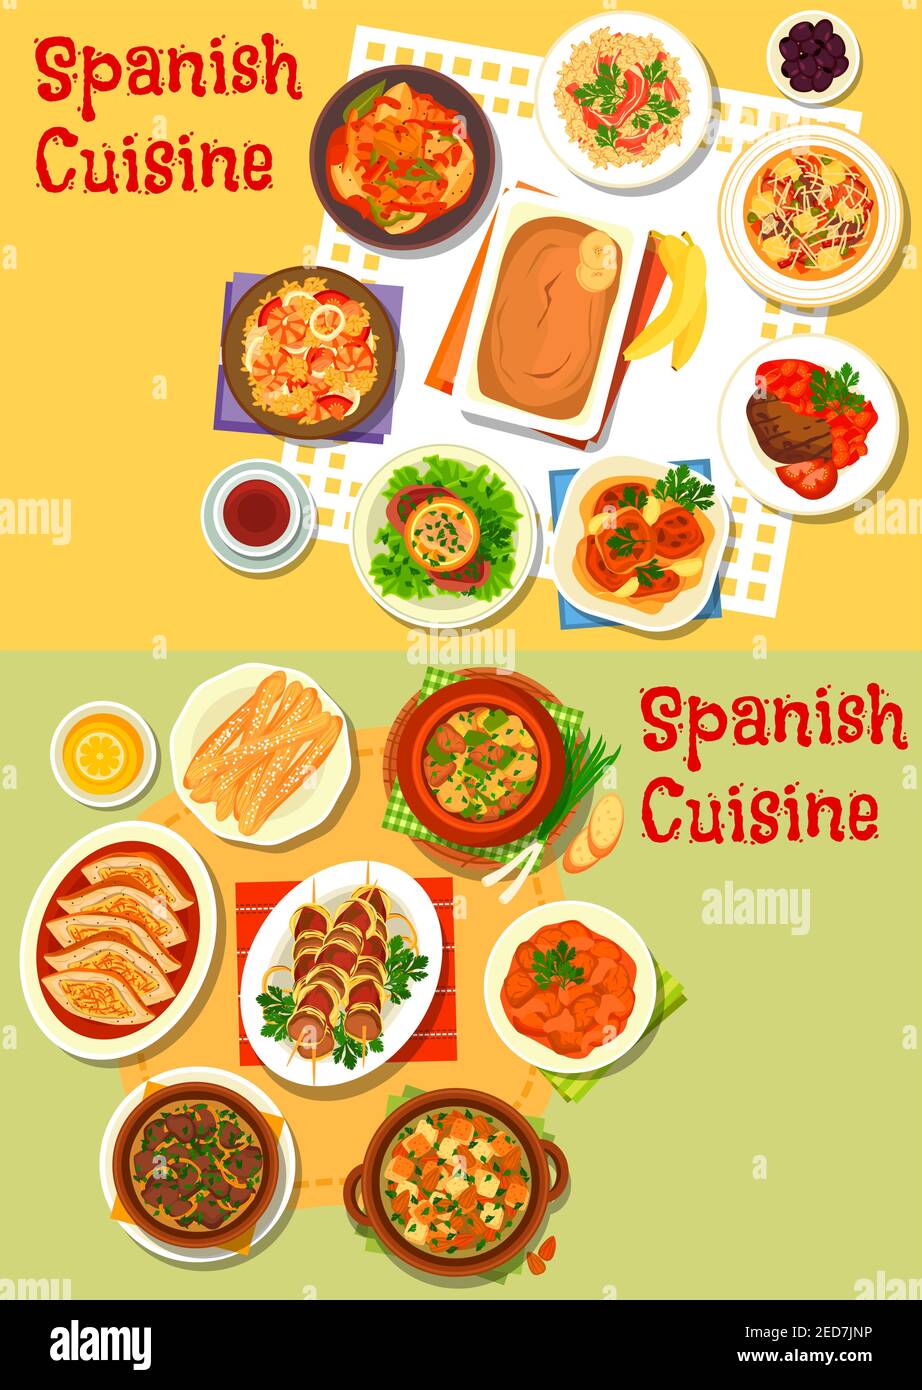 Spanish cuisine icon of seafood paella, ham rice, meat and fish stew with vegetables, baked pork, lamb kidney, liver and chicken, beef steak, sausage Stock Vector